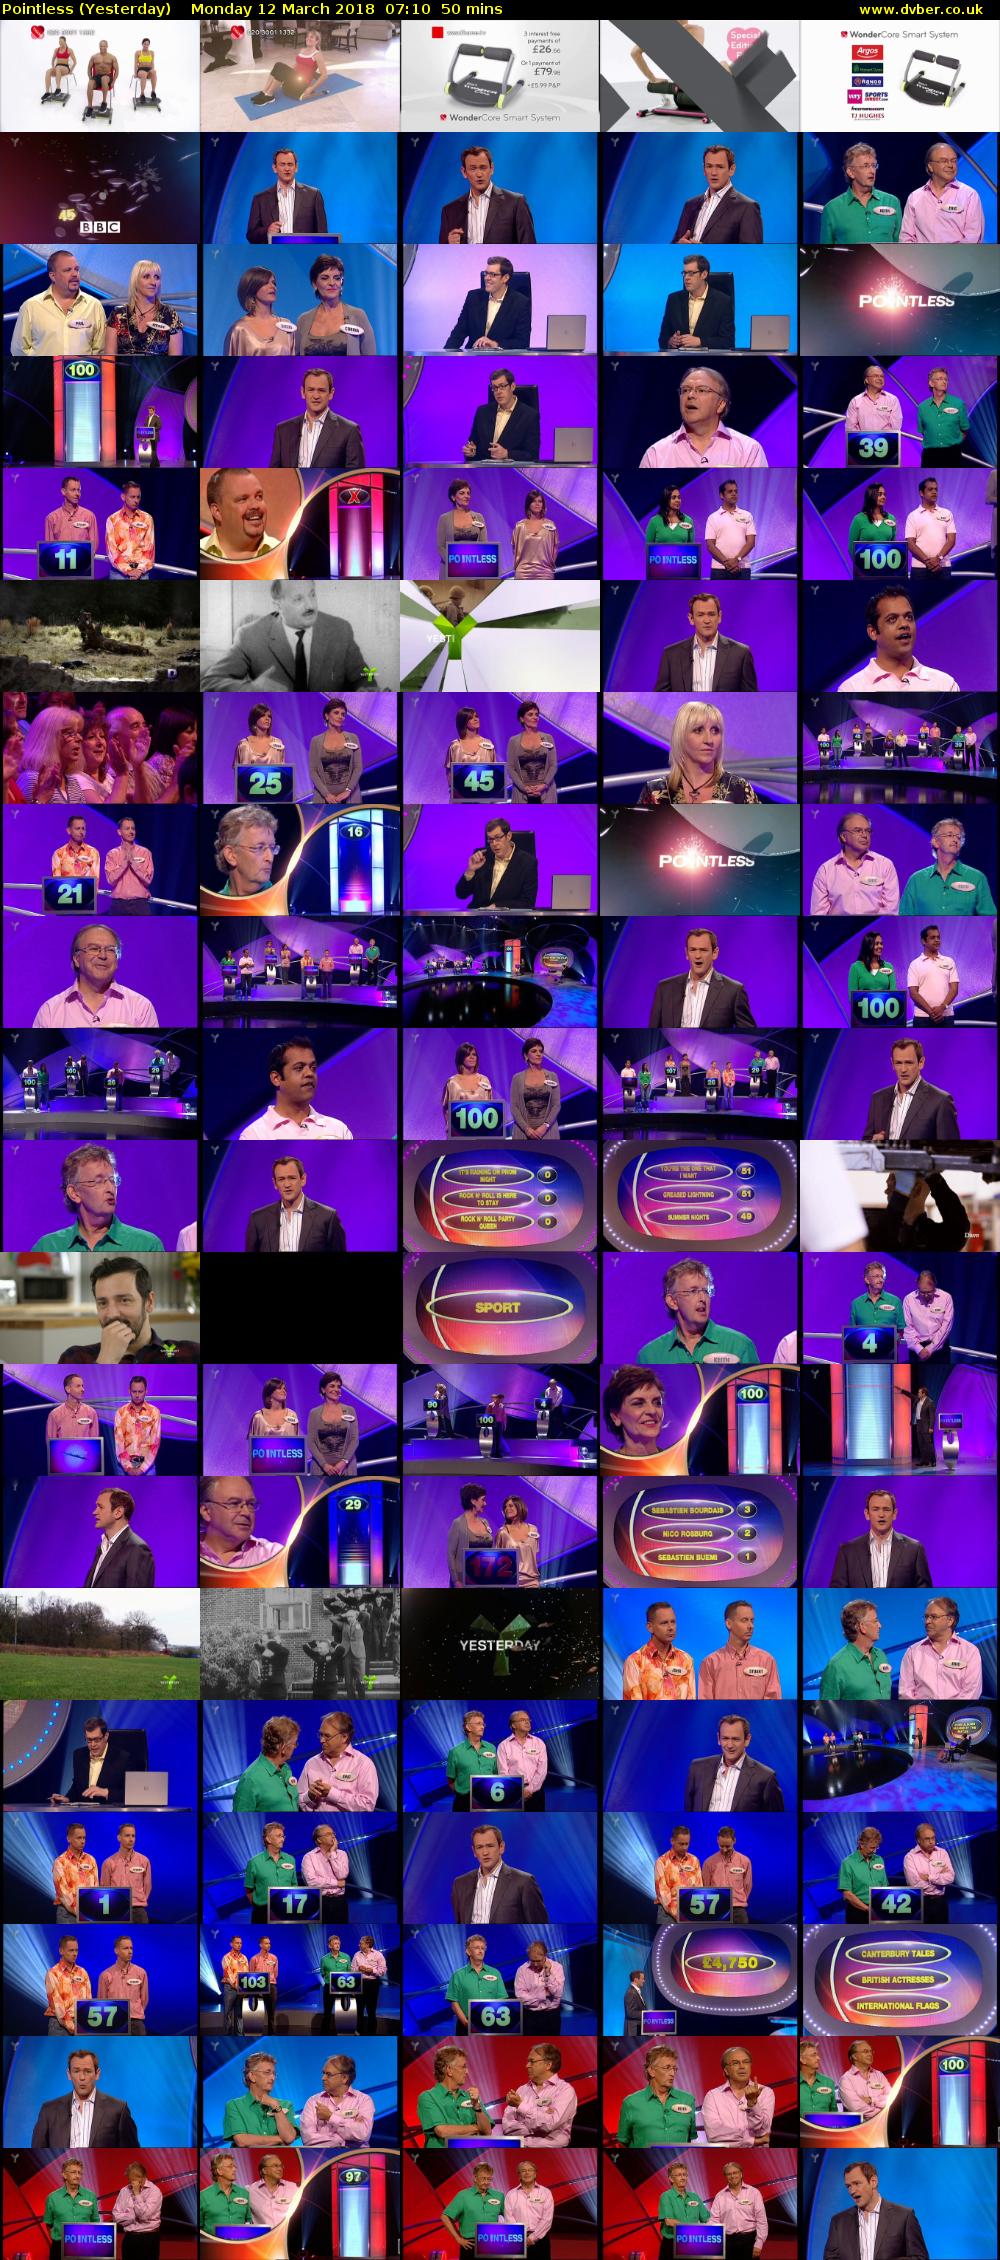 Pointless (Yesterday) Monday 12 March 2018 07:10 - 08:00